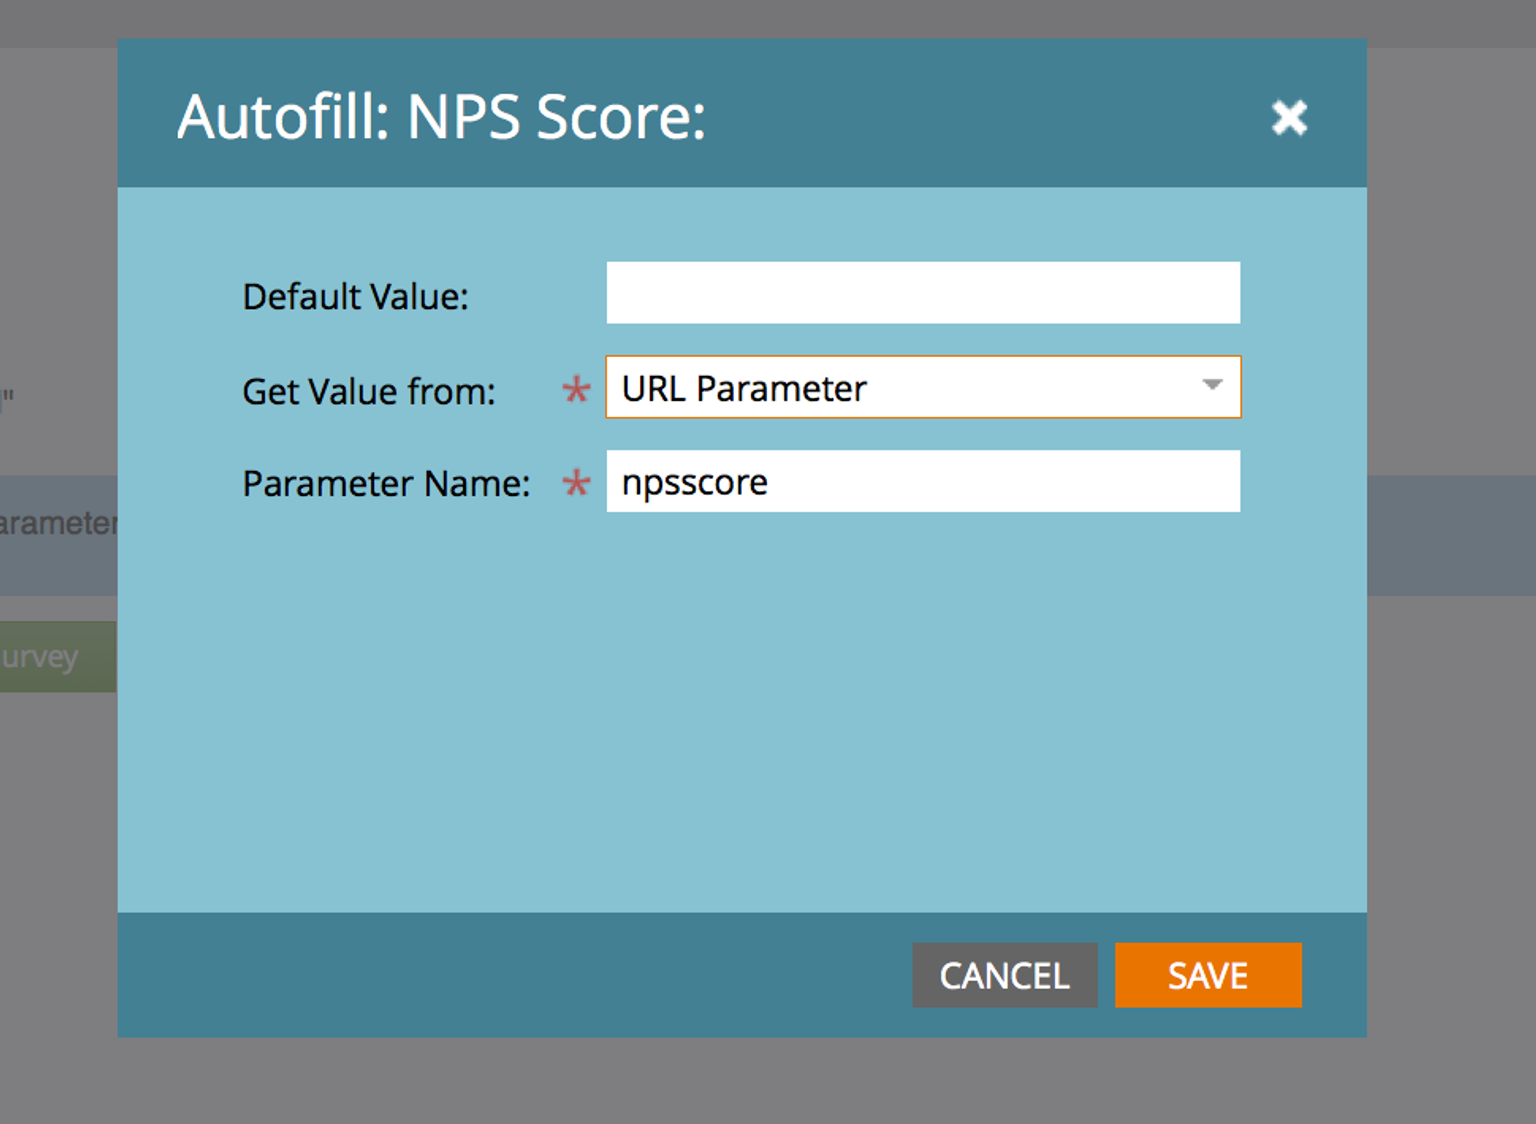 Autofill rules for NPS score